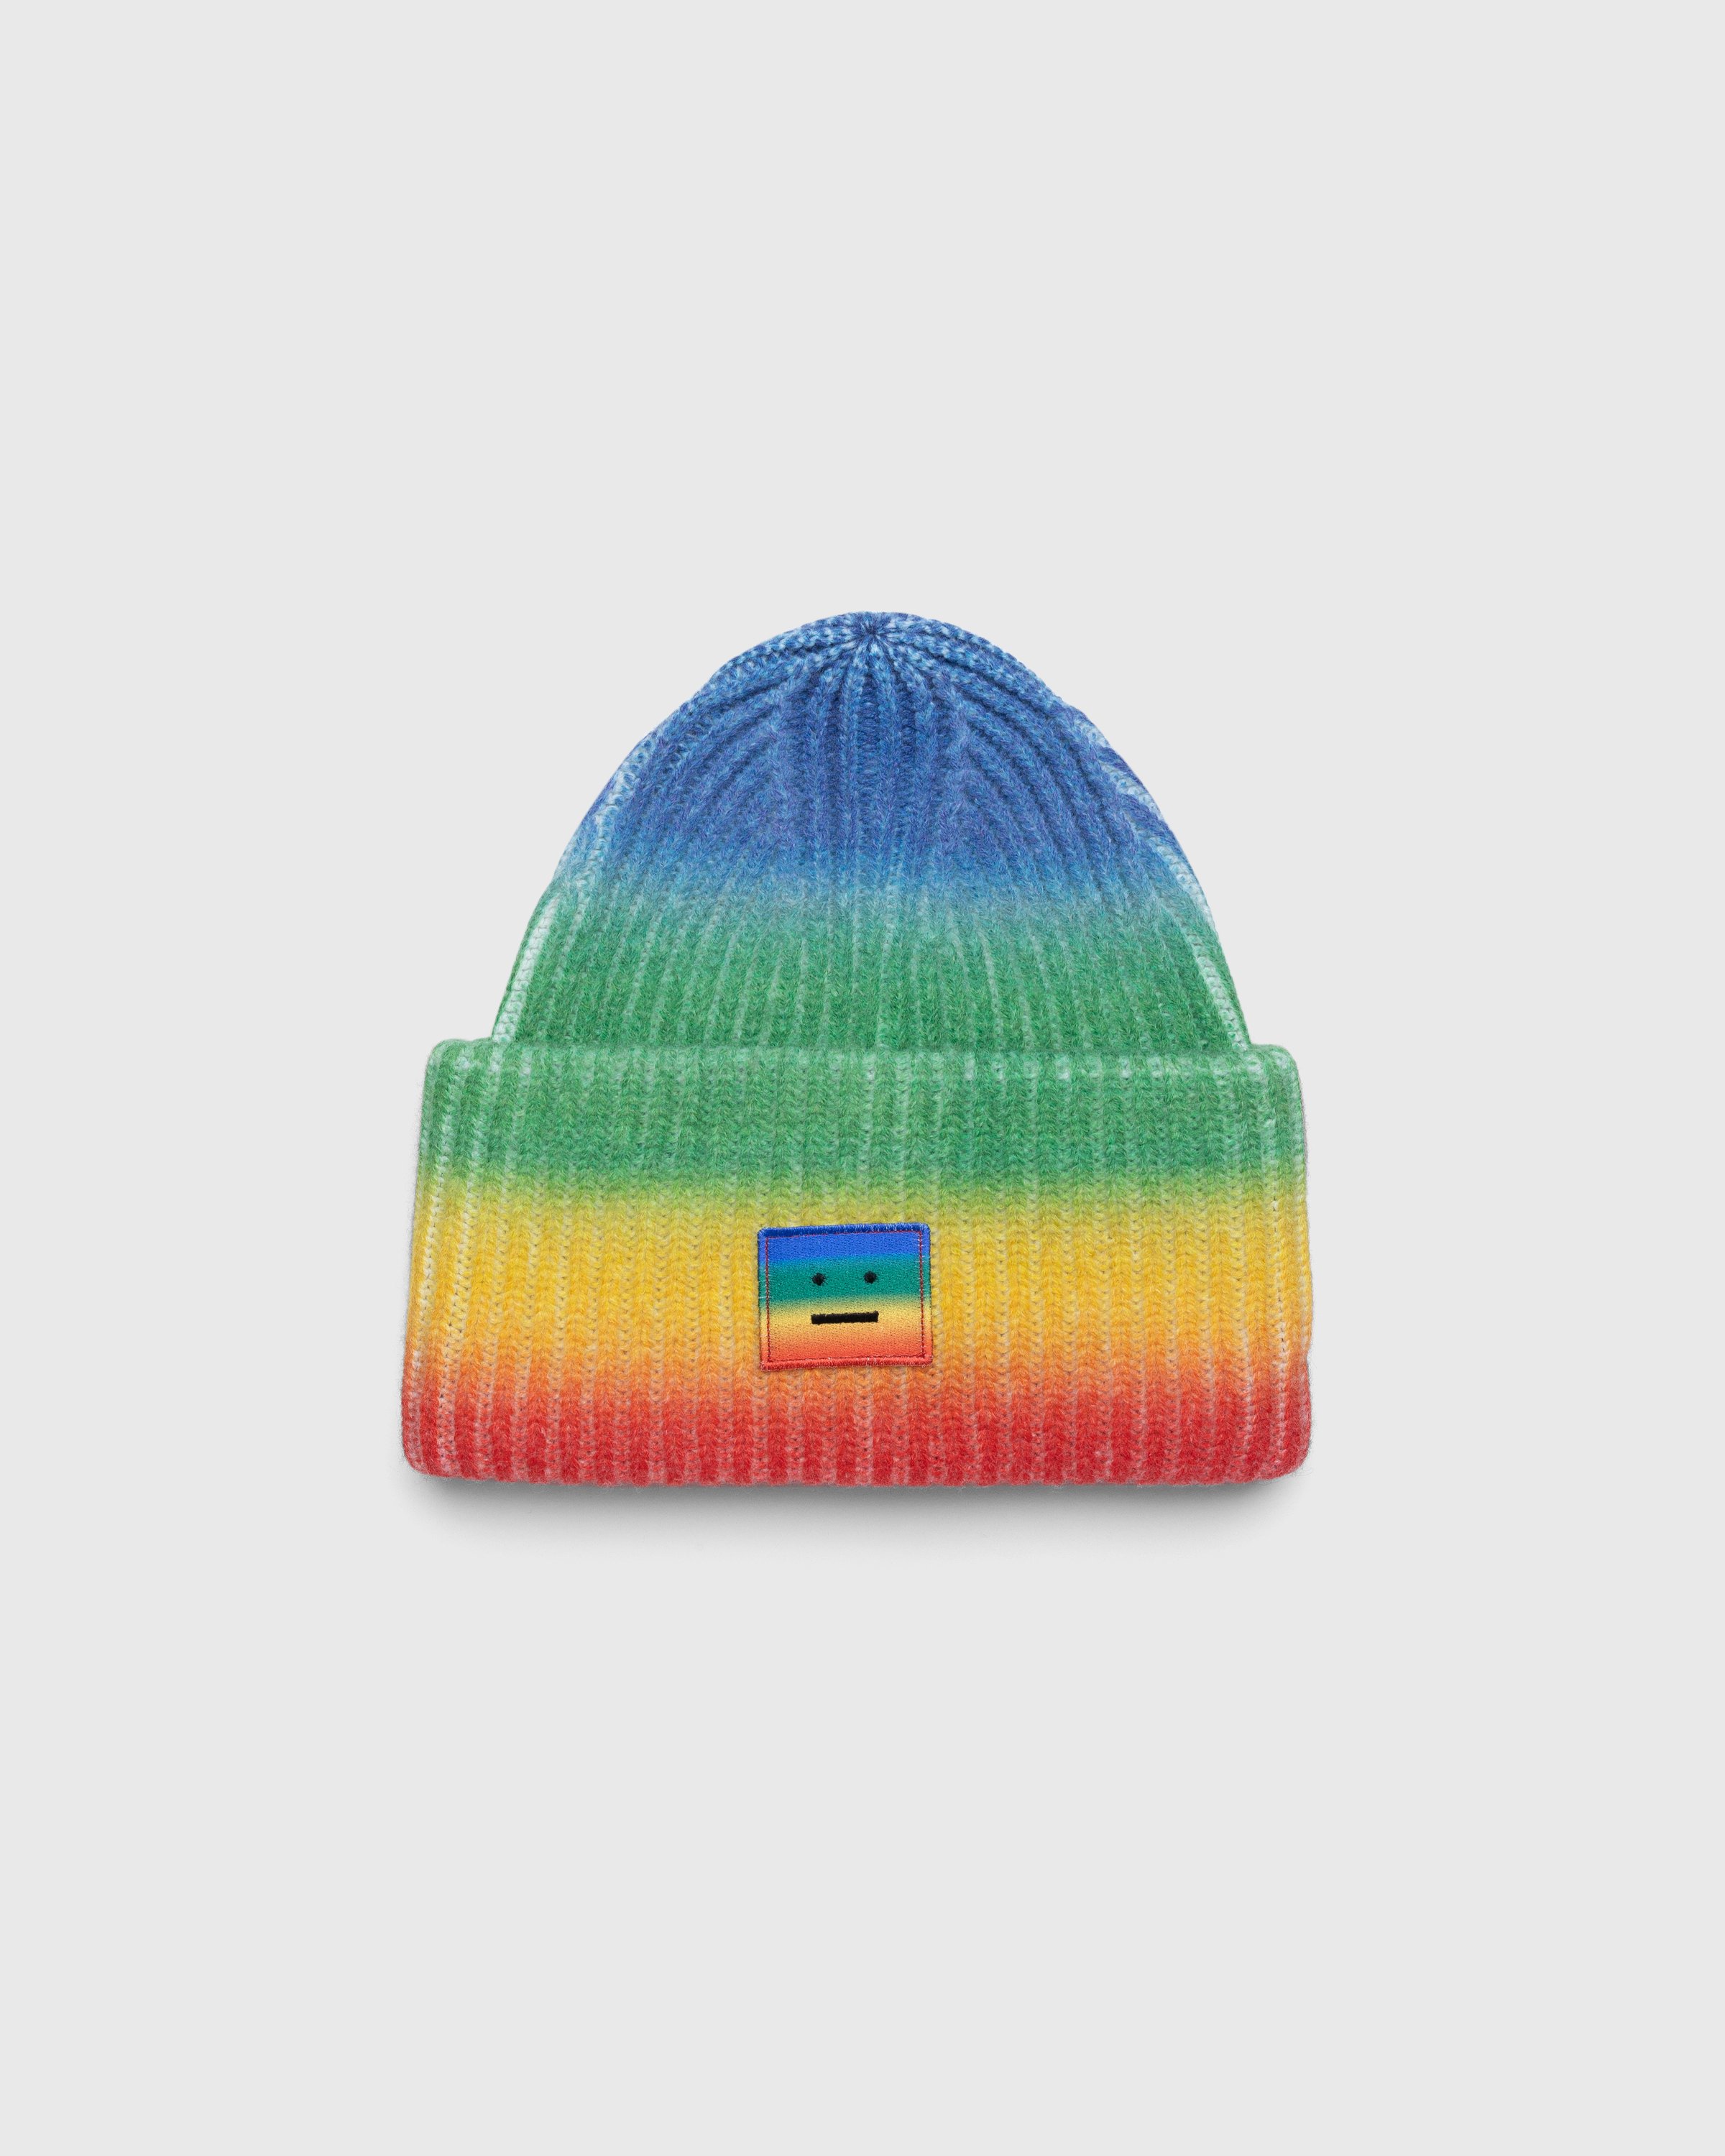 Acne Studios - Knit Face Patch Beanie Coral Red/Green - Accessories - Multi - Image 1